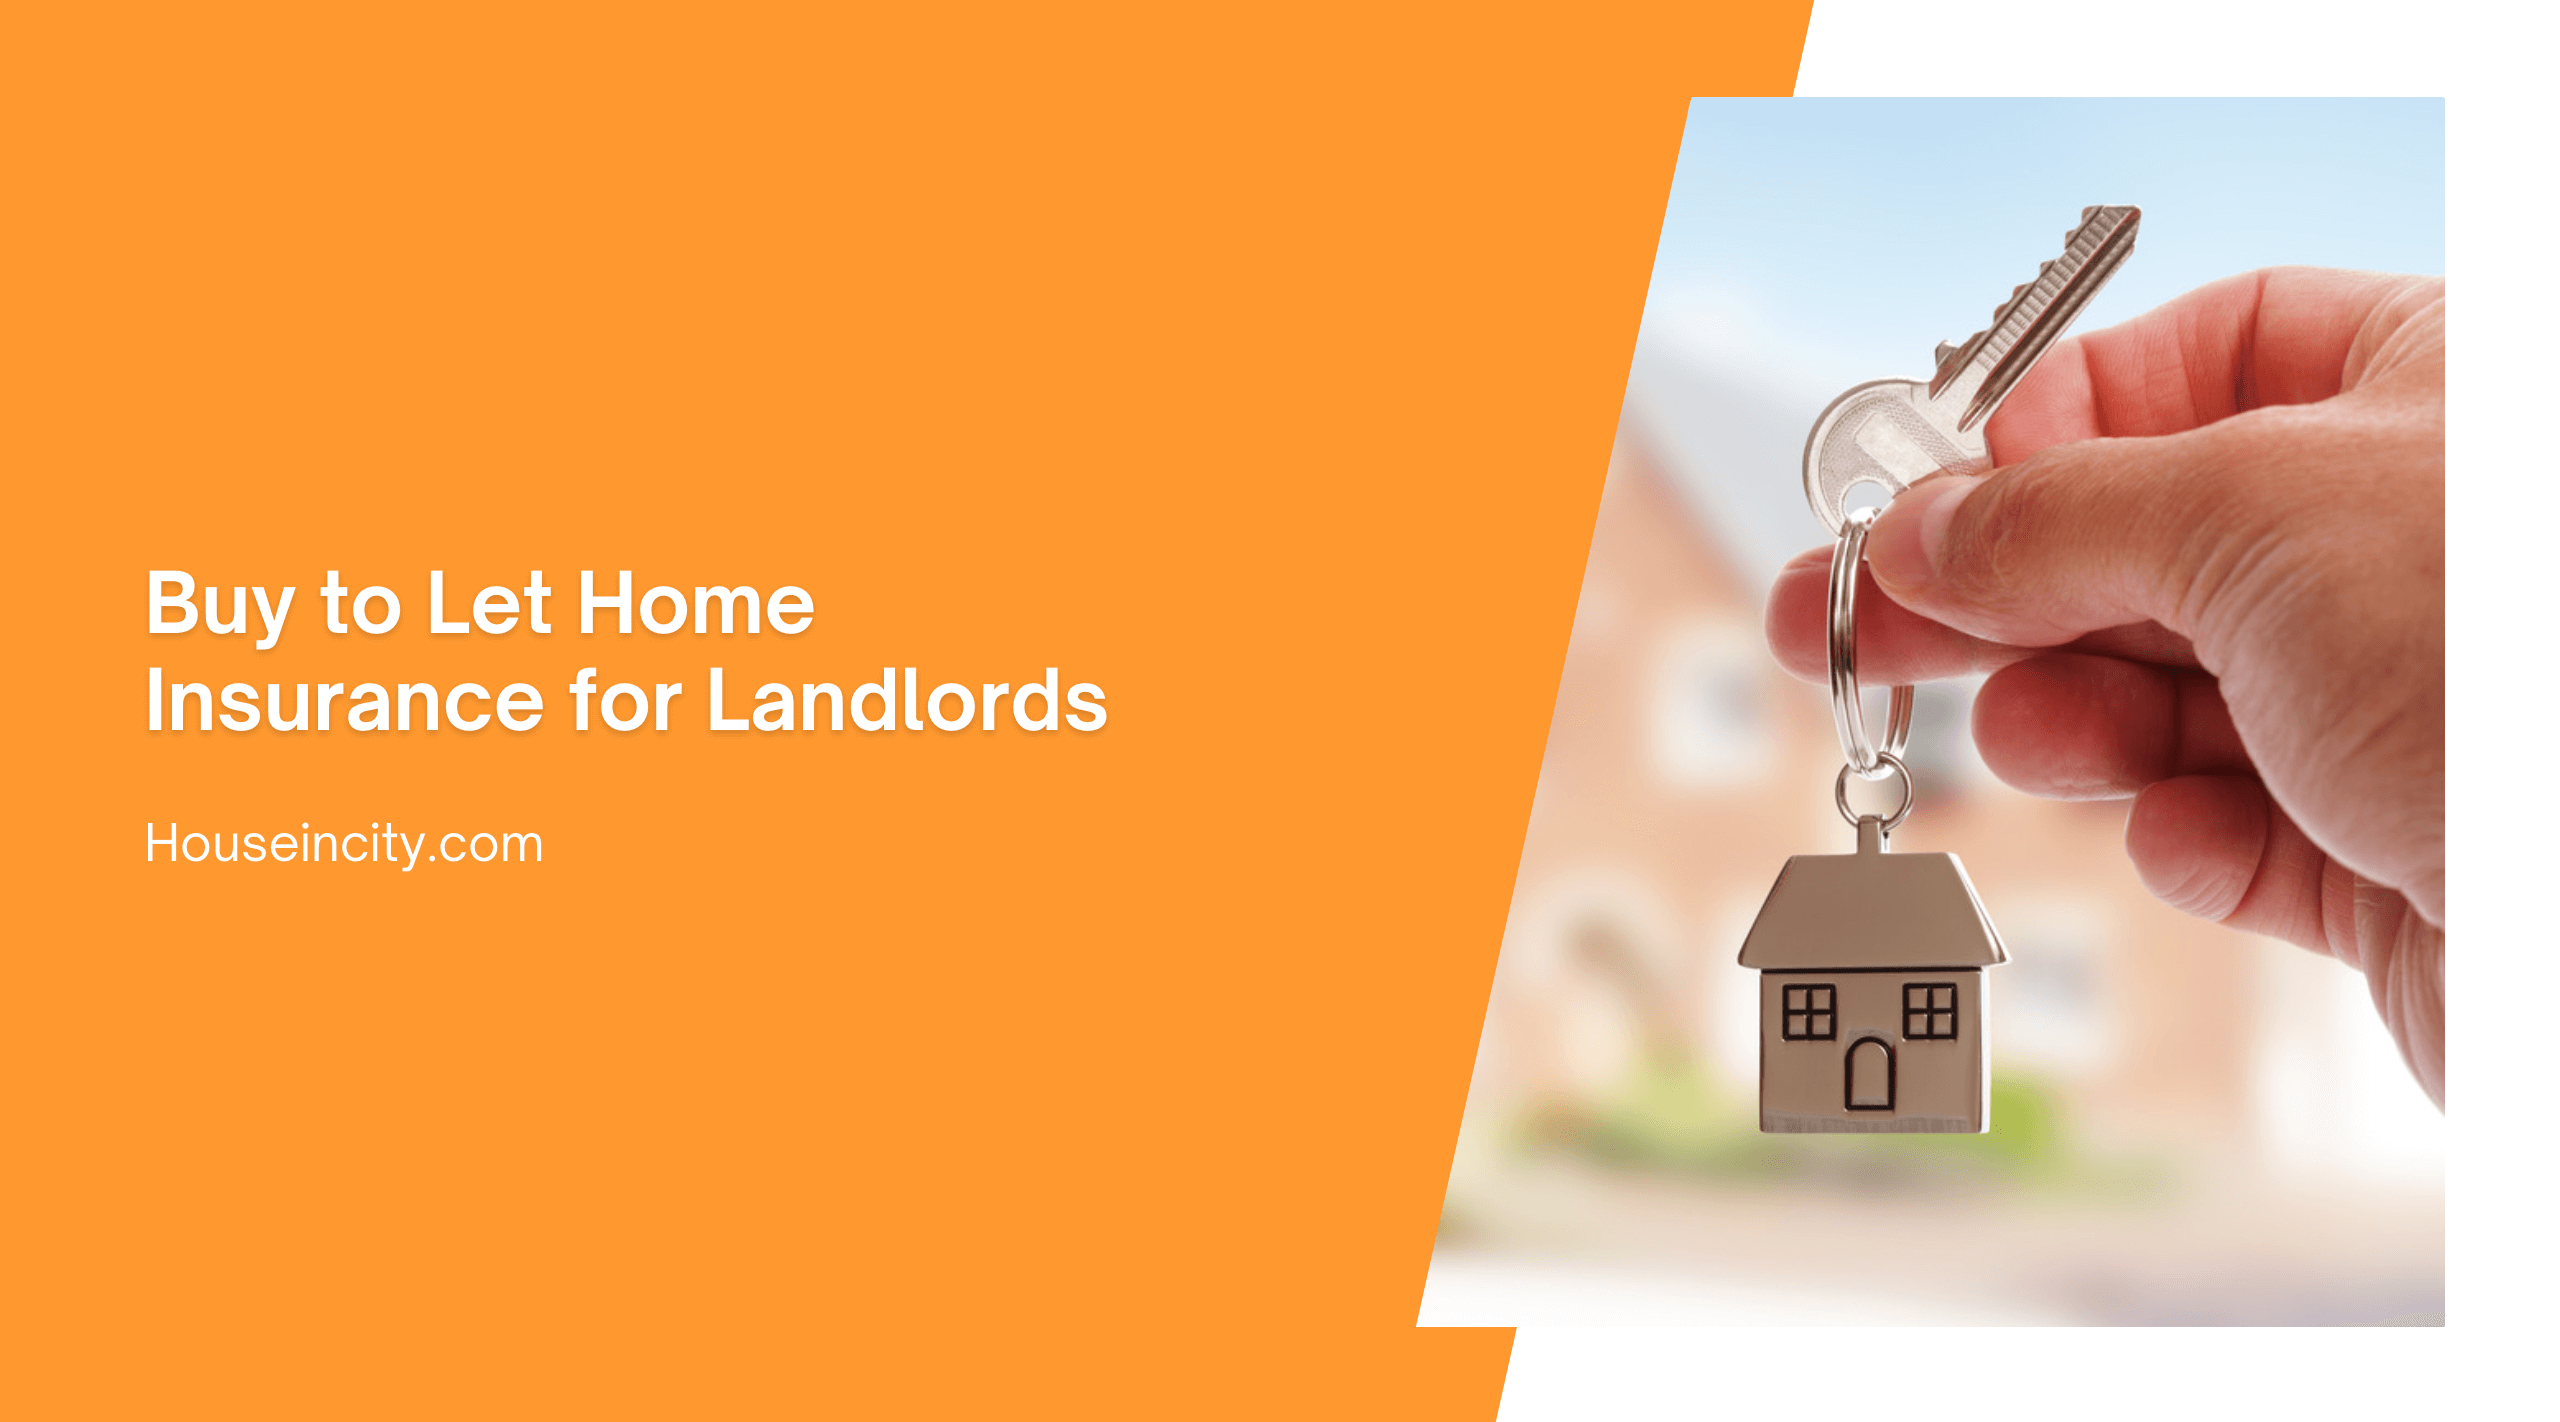 Buy to Let Home Insurance for Landlords